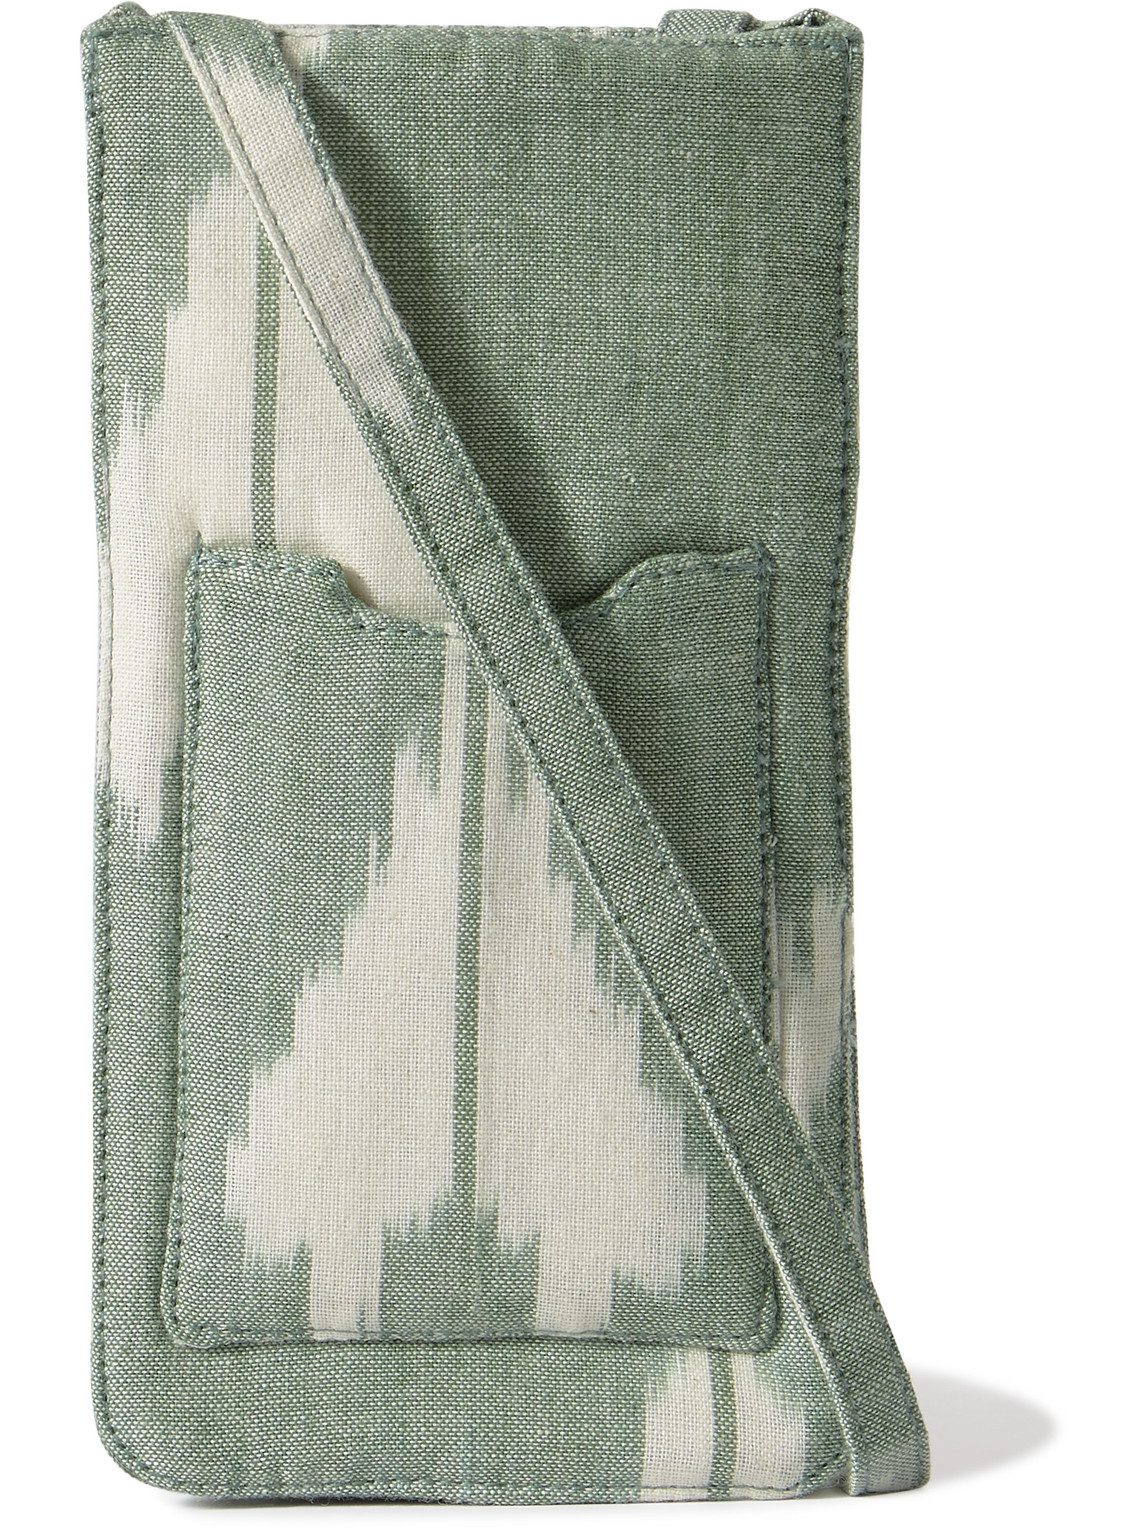 Kardo Printed Cotton Phone Pouch In Green